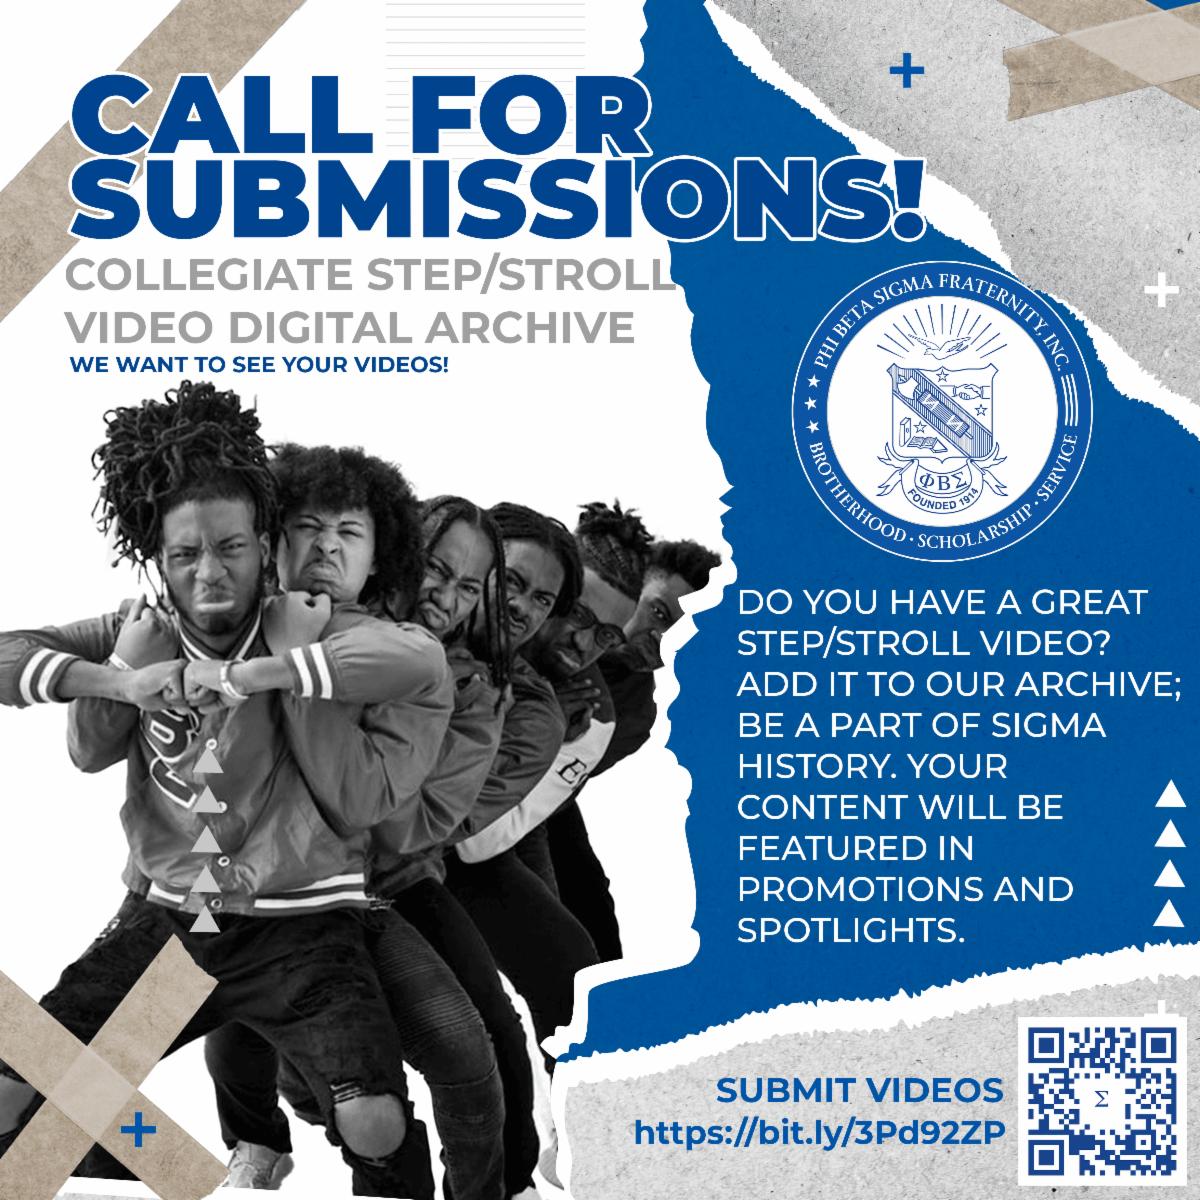 CALL FOR SUBMISSIONS! Attention all talented step and stroll performers: contribute to the Collegiate Step/Stroll Digital Archive! Be featured in our promotions and highlights by submitting your videos. Submit here: bit.ly/3Pd92ZP #pbs1914 #Sigma110